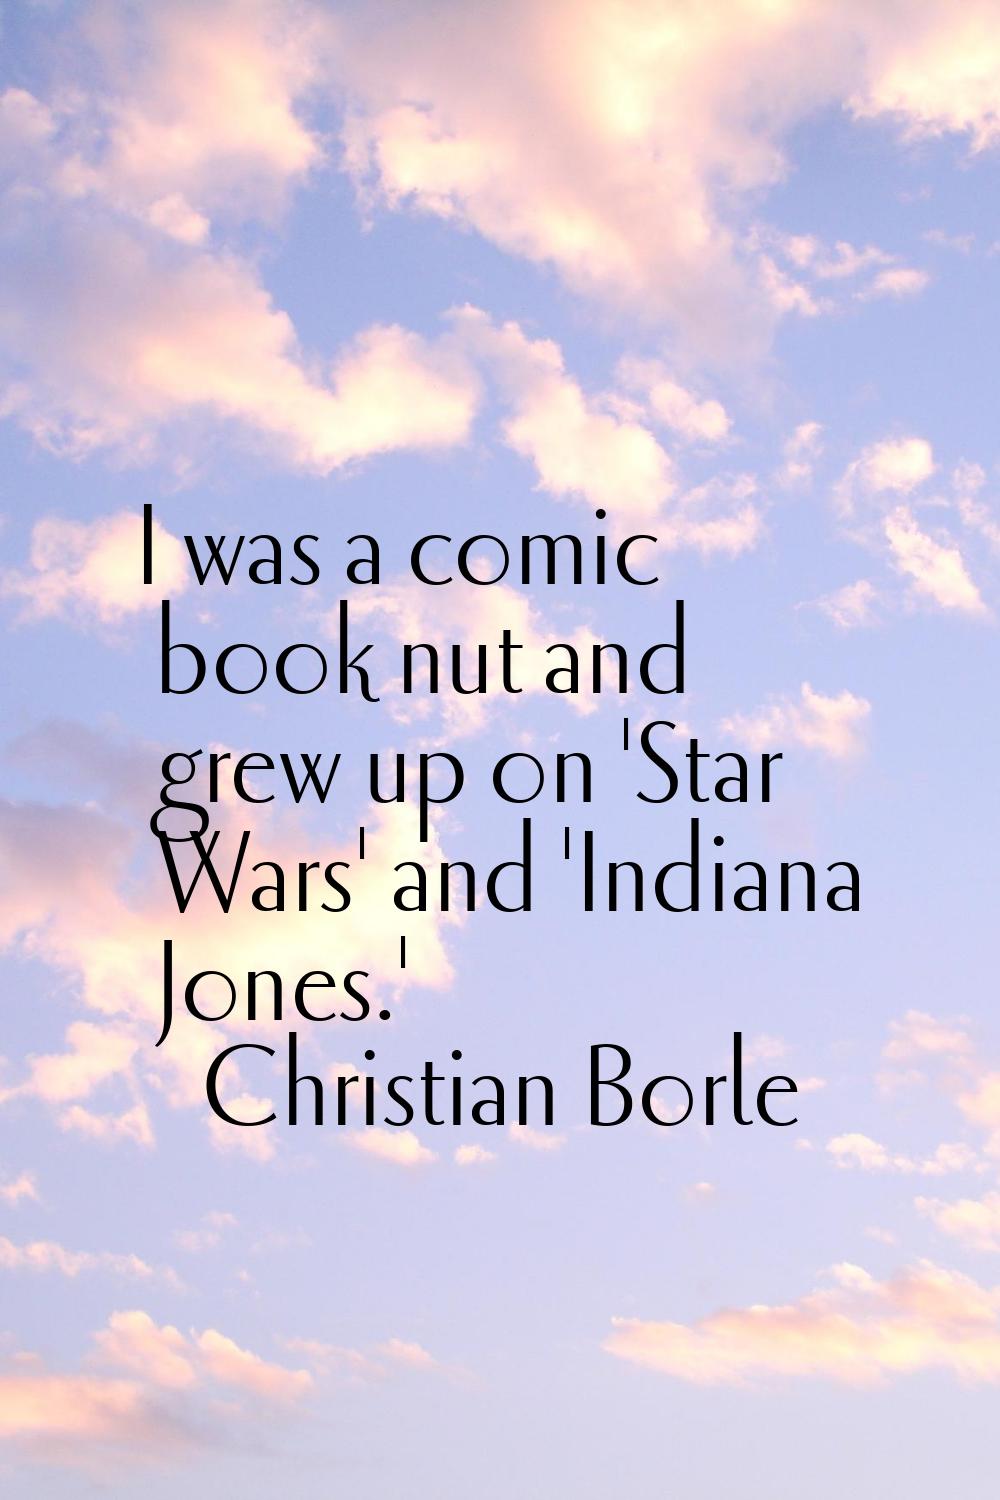 I was a comic book nut and grew up on 'Star Wars' and 'Indiana Jones.'